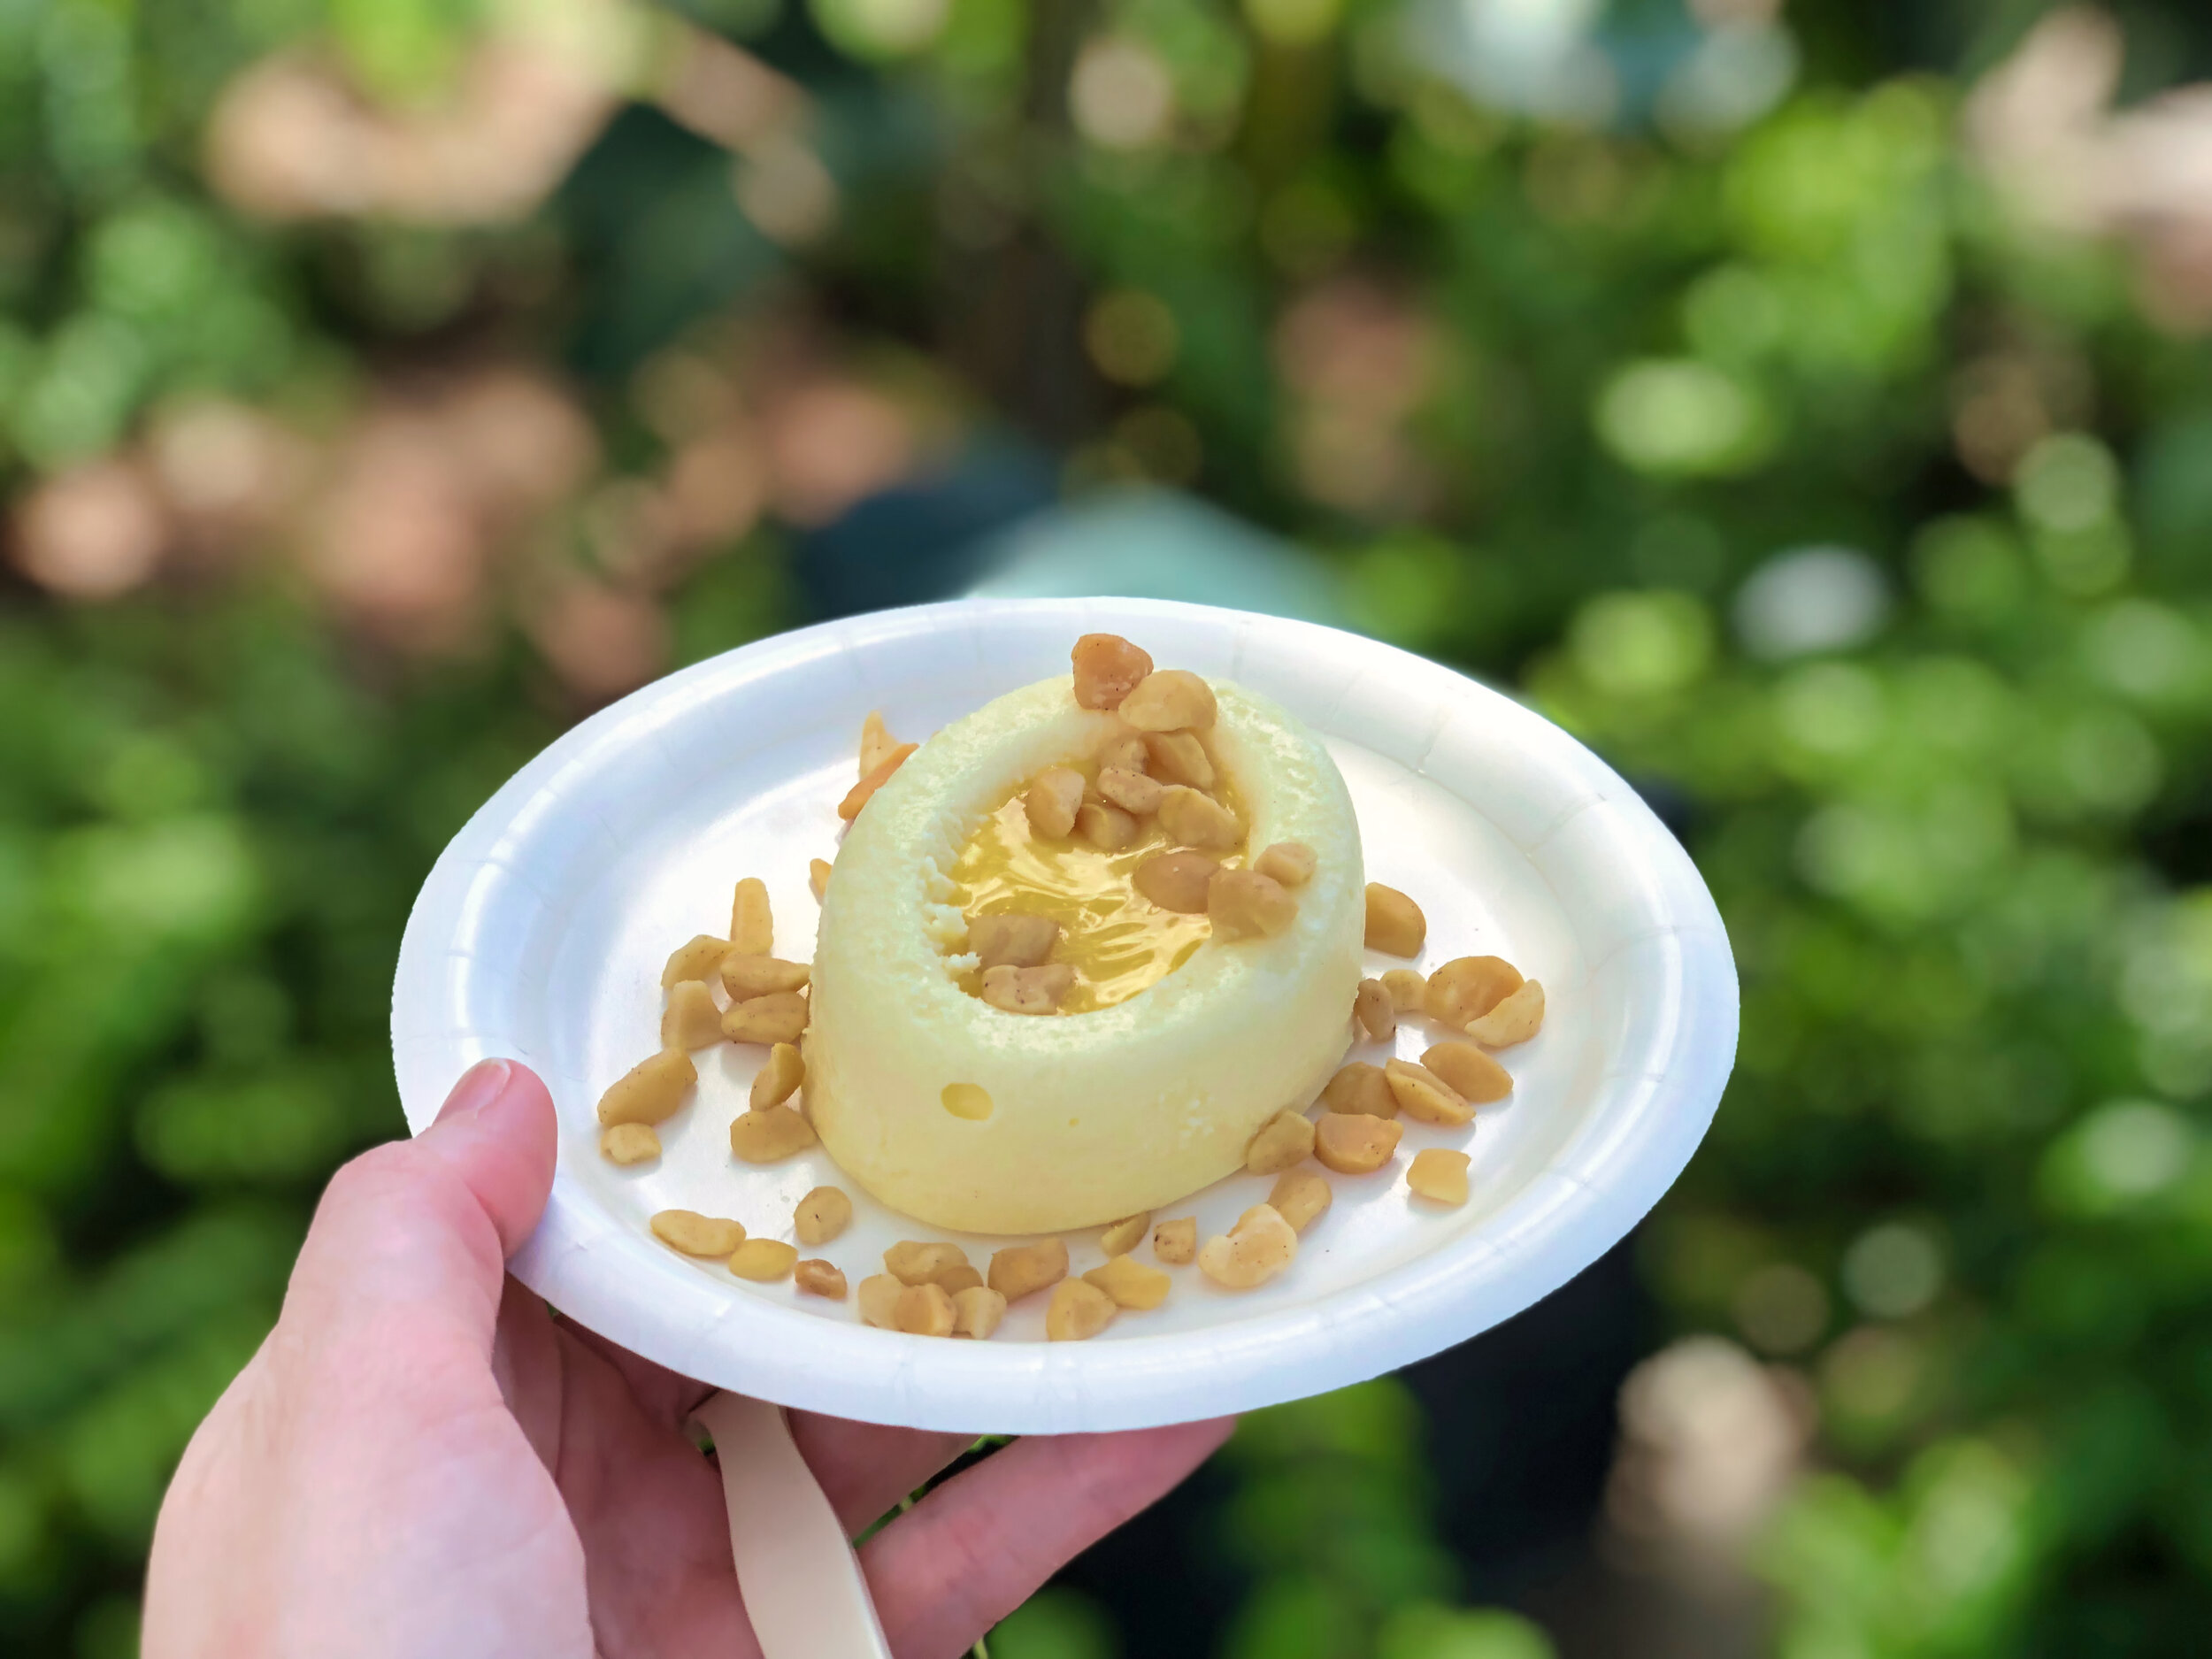 Passion Fruit Cheesecake - 2019 Epcot Food & Wine Festival